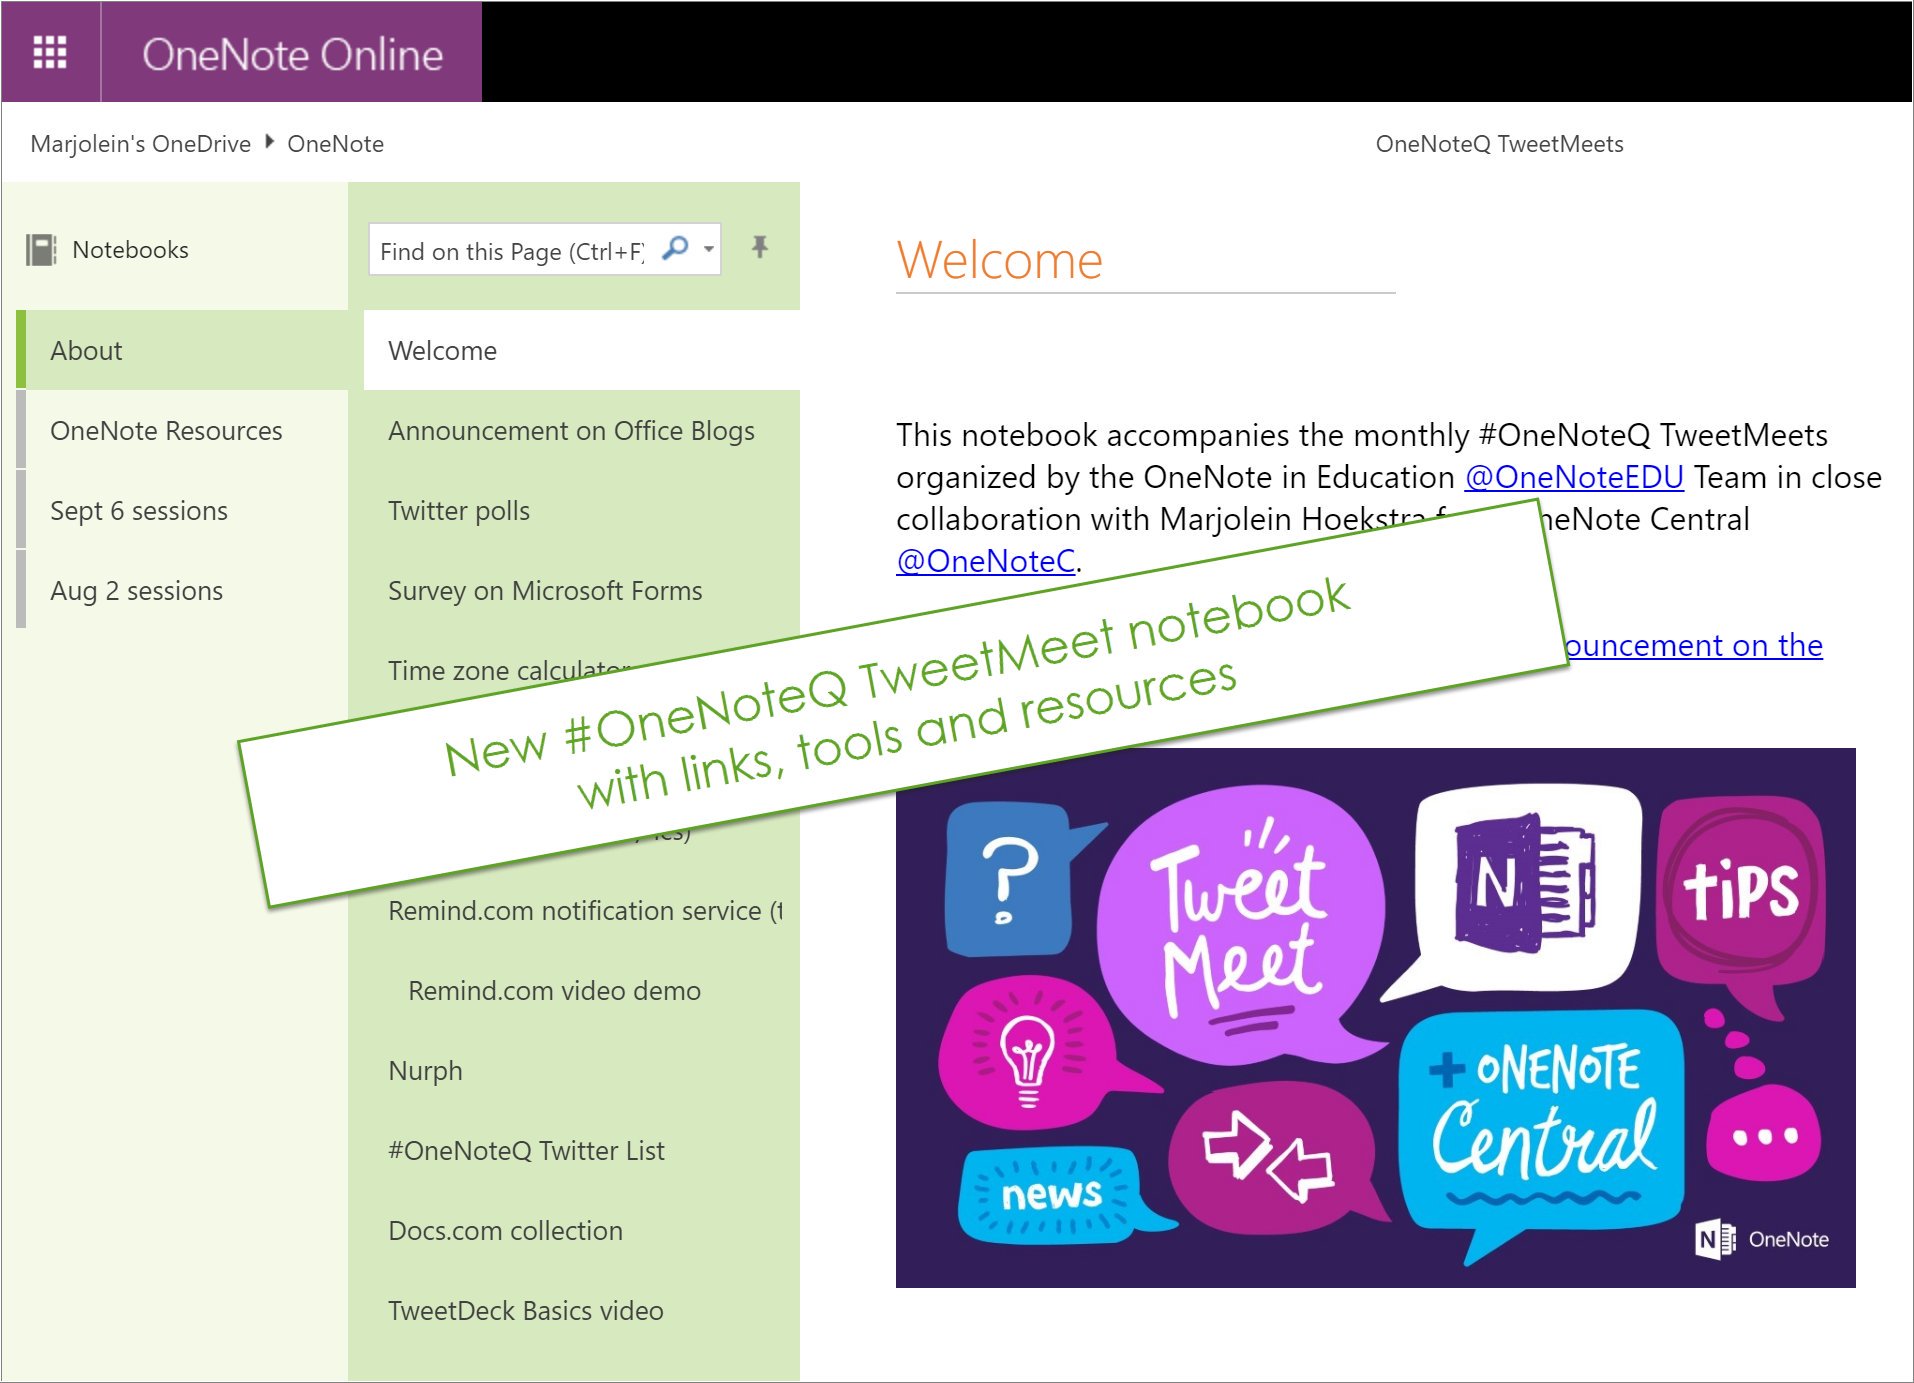 All links, tools and resources about #OneNoteQ TweetMeets are in this #OneNote notebook:
https://t.co/SSmIgvJrH8 https://t.co/ZfK46fCj4F